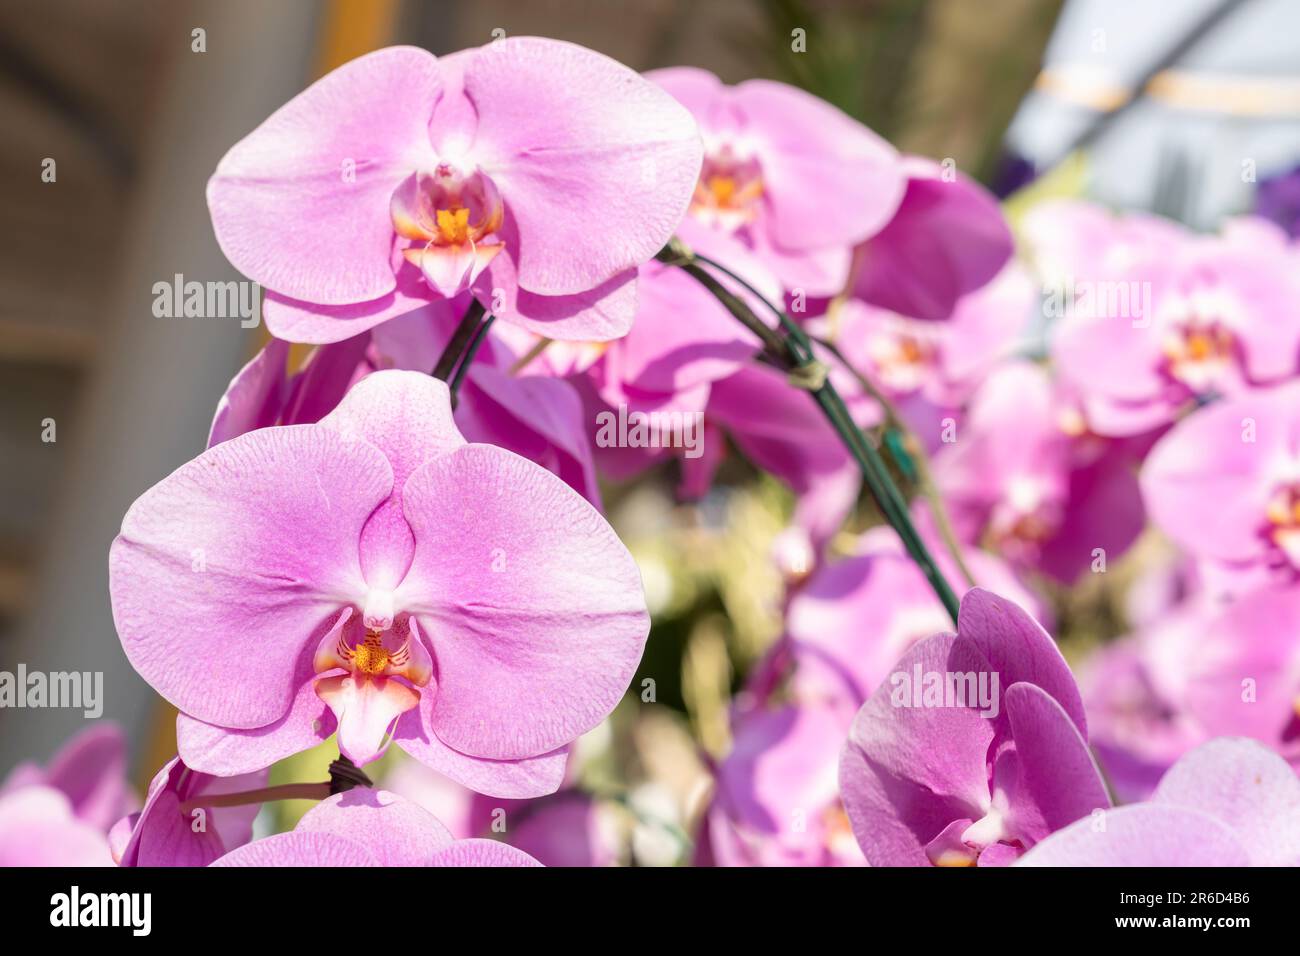 Closeup view of a pink mottled Phalaenopsis orchid plant. Stock Photo